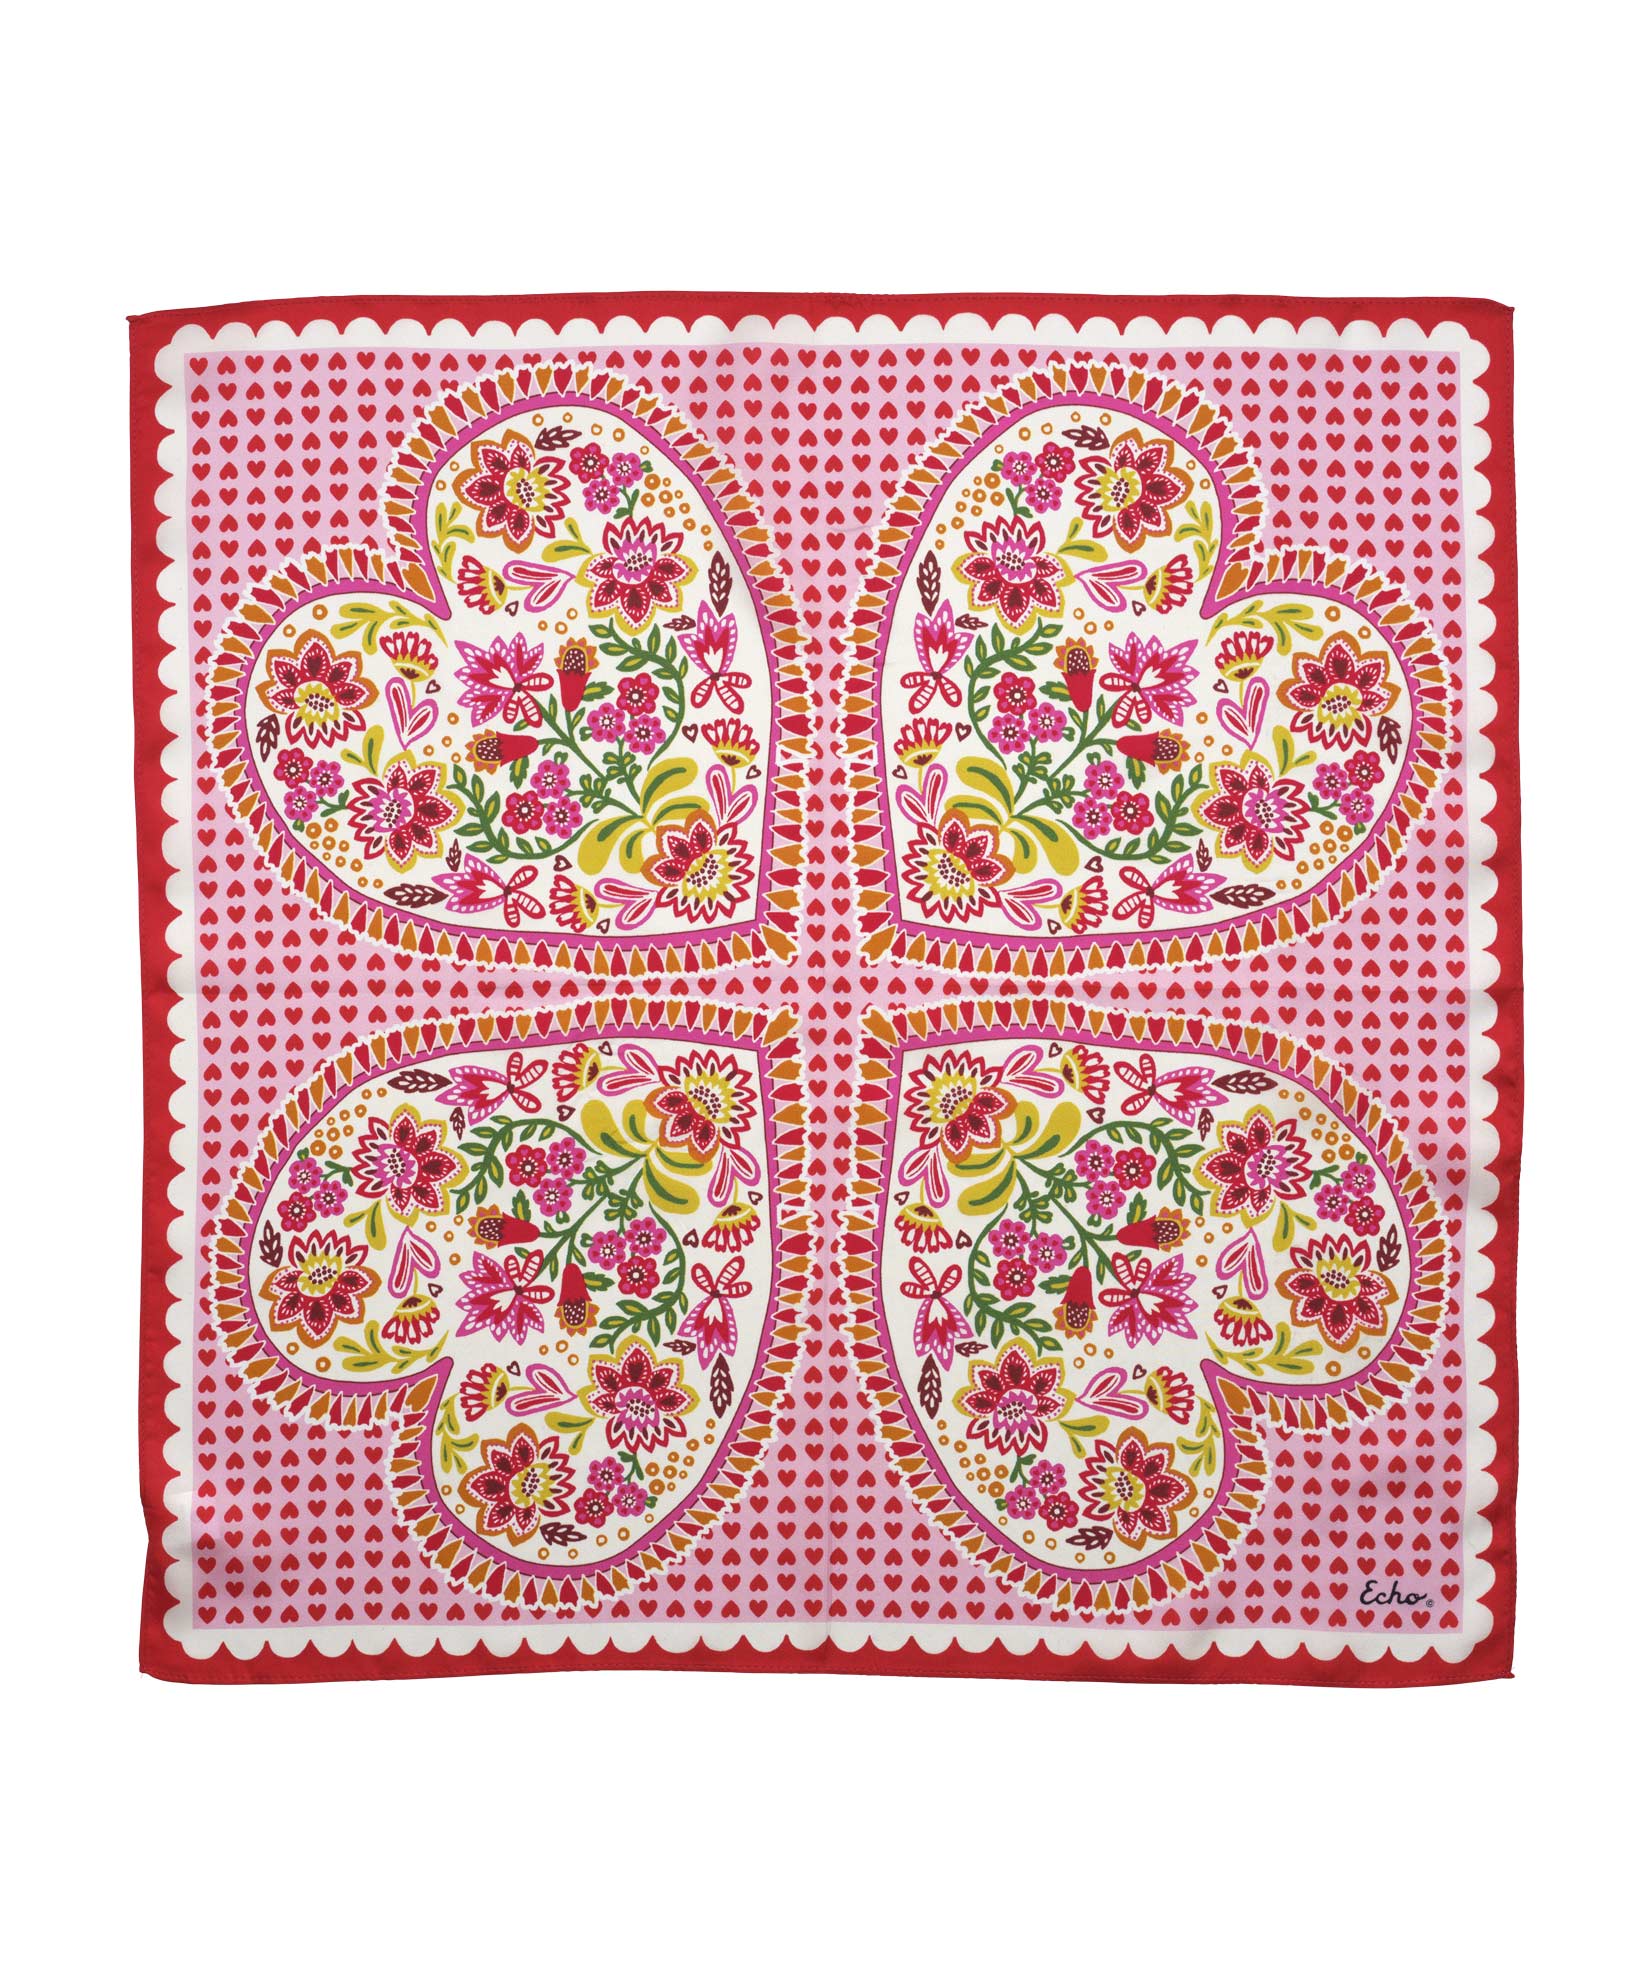 Sweetie Silk Bandana in color Candy Pink